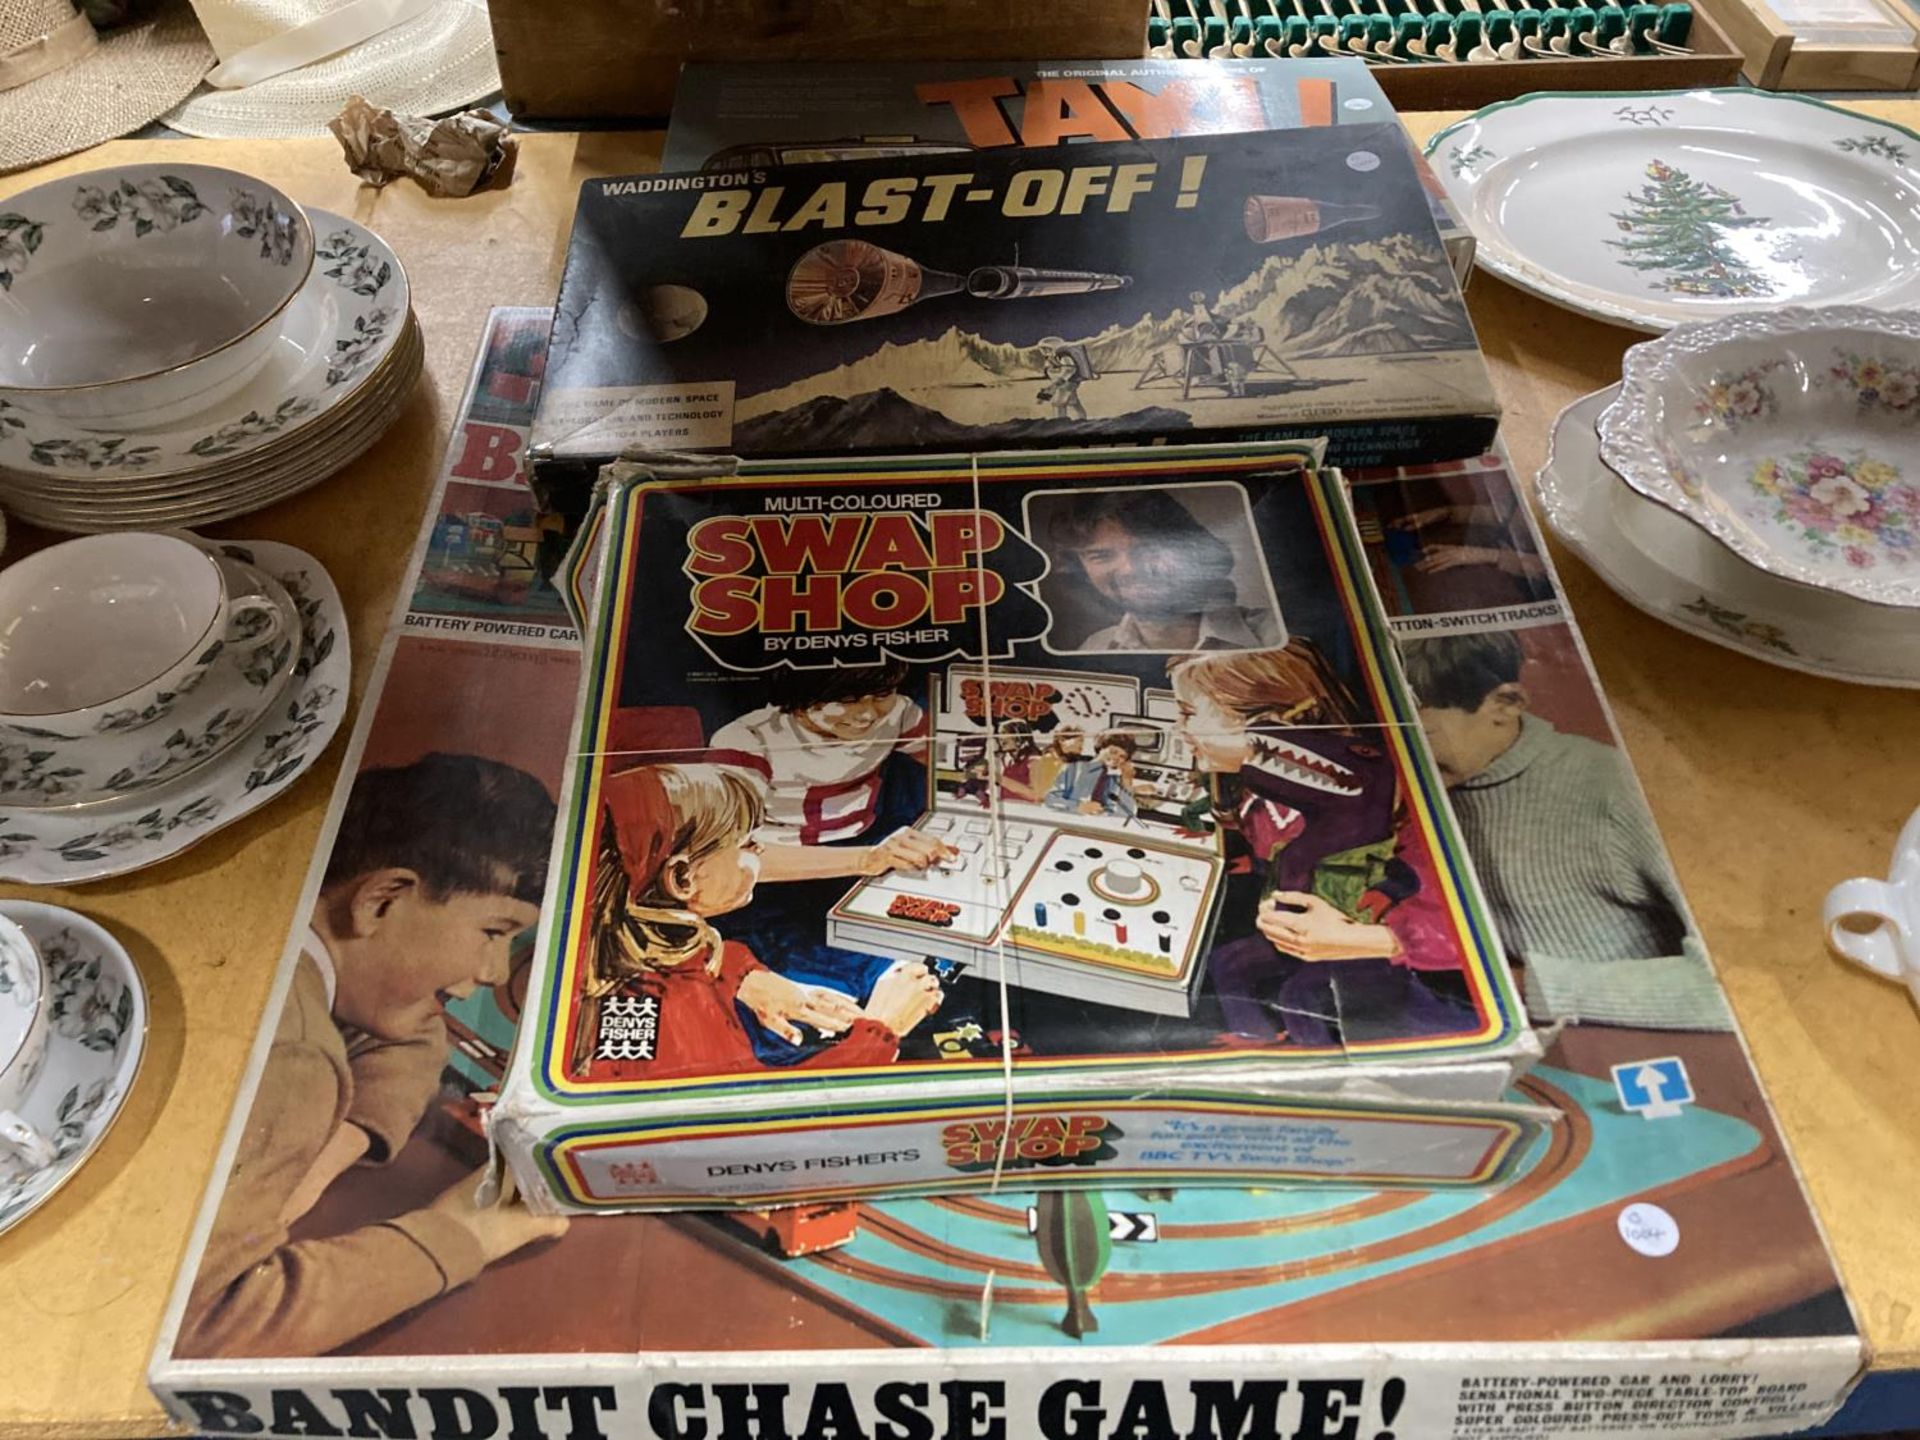 FOUR VINTAGE BOARD GAMES TO INCLUDE 'BANDIT CHASE GAME', MULTI-COLOURED SWAP SHOP, WADDINGTON'S